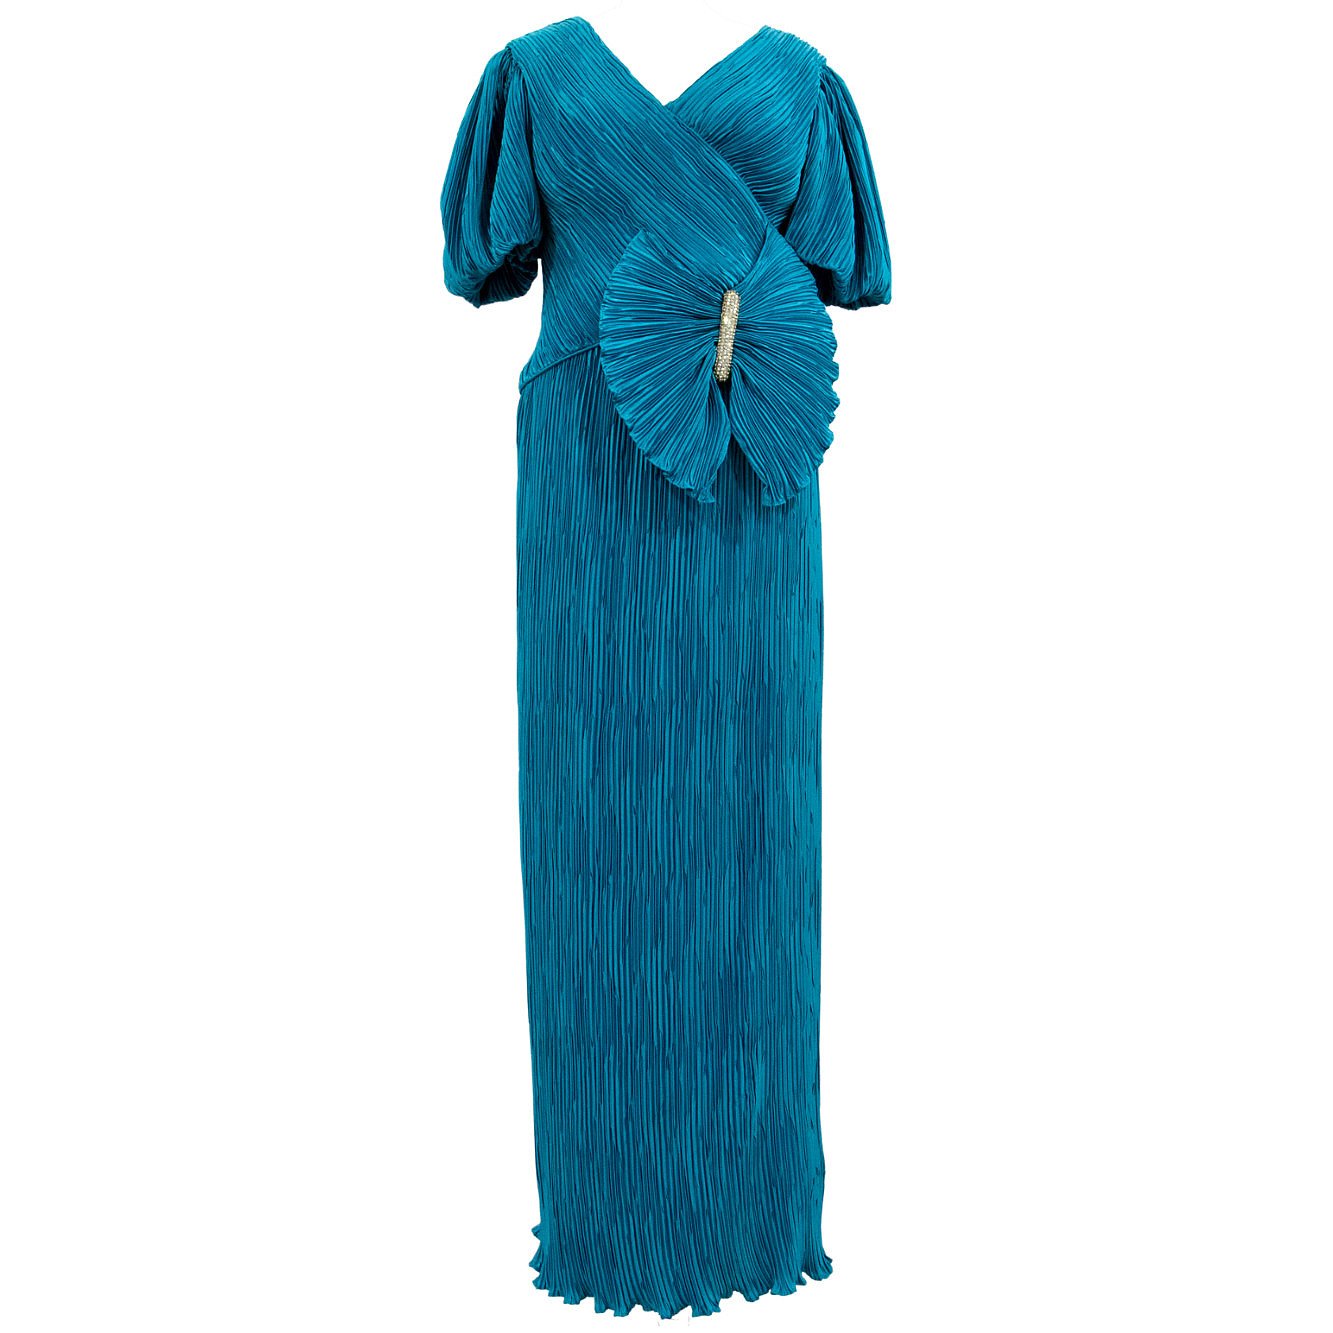 Narrations LDN Vintage Mictopleated Evening Dress With Bow